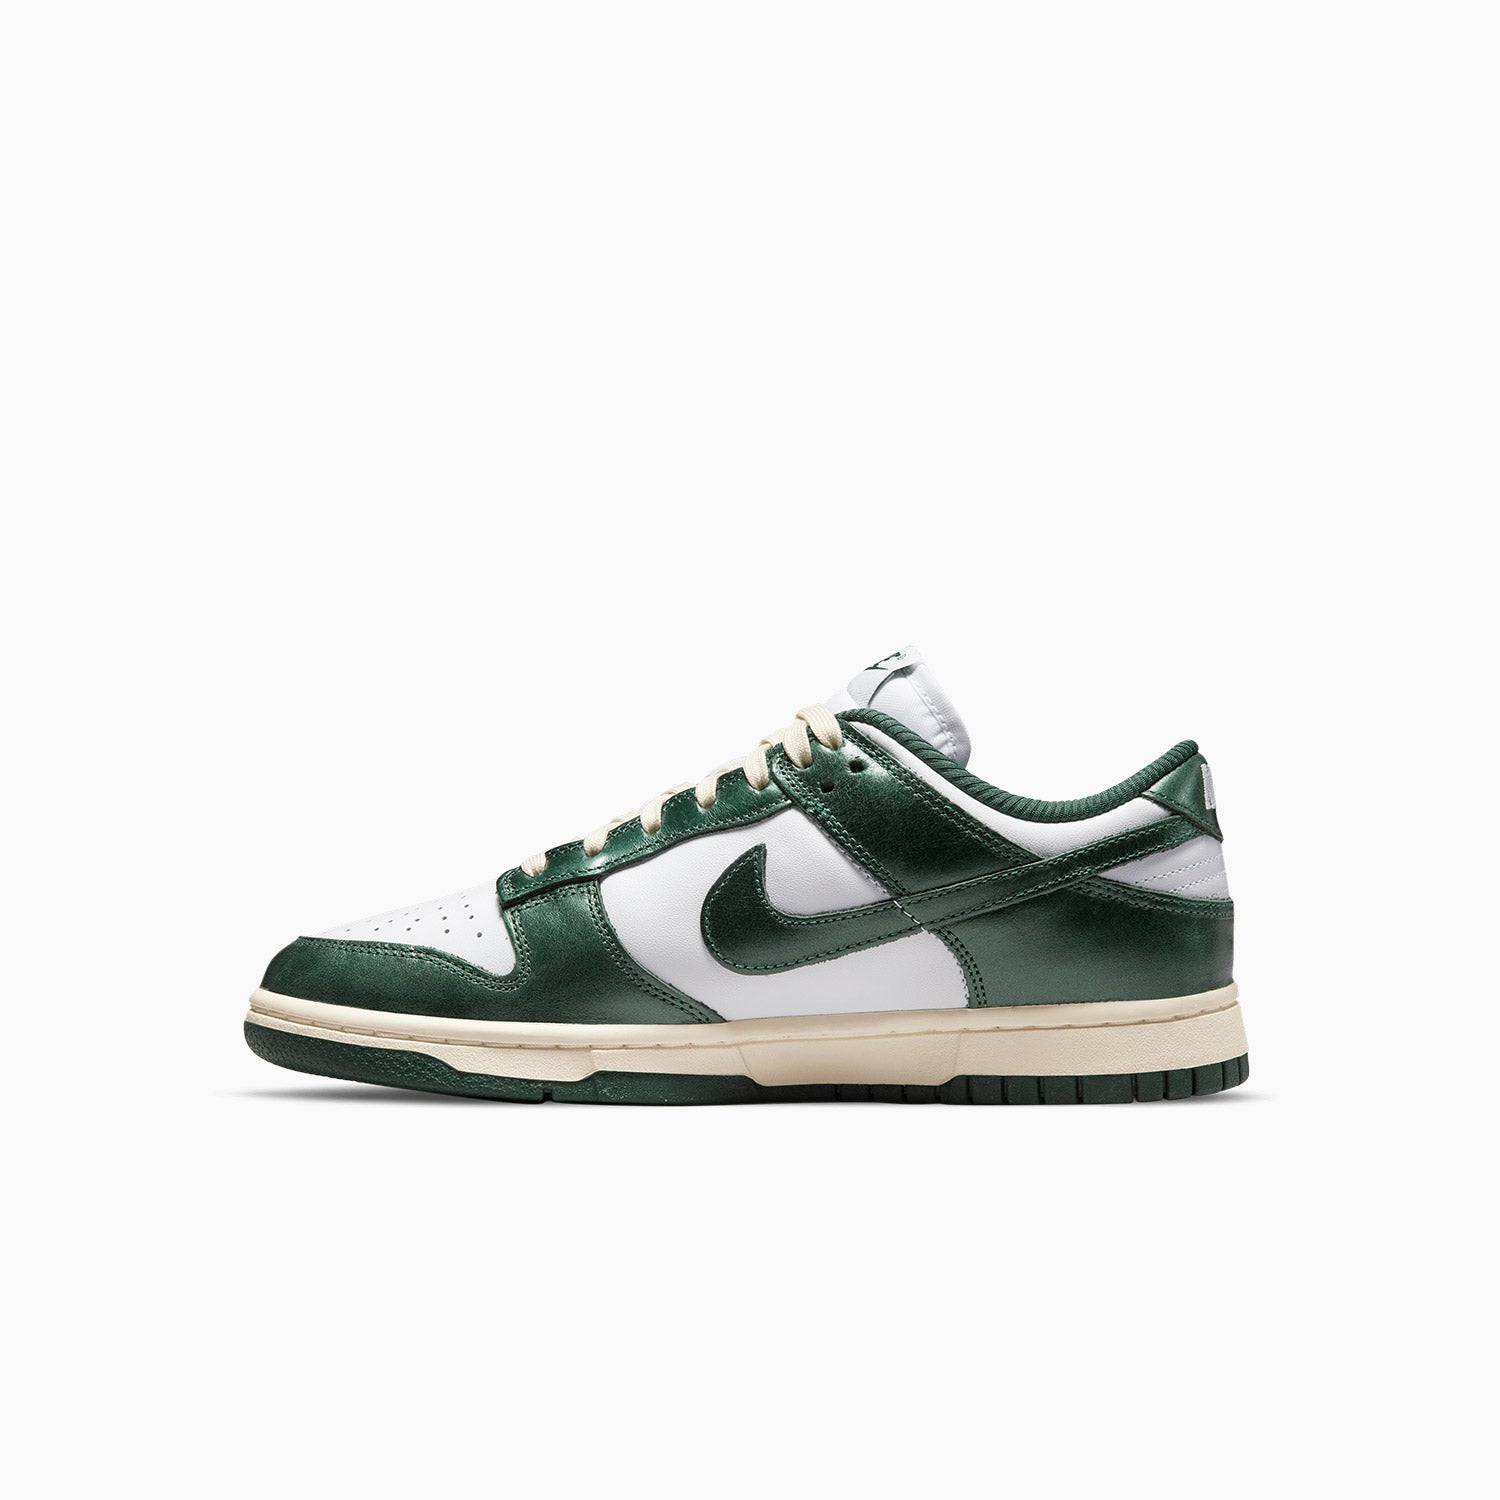 nike-womens-dunk-low-vintage-green-shoes-dq8580-100